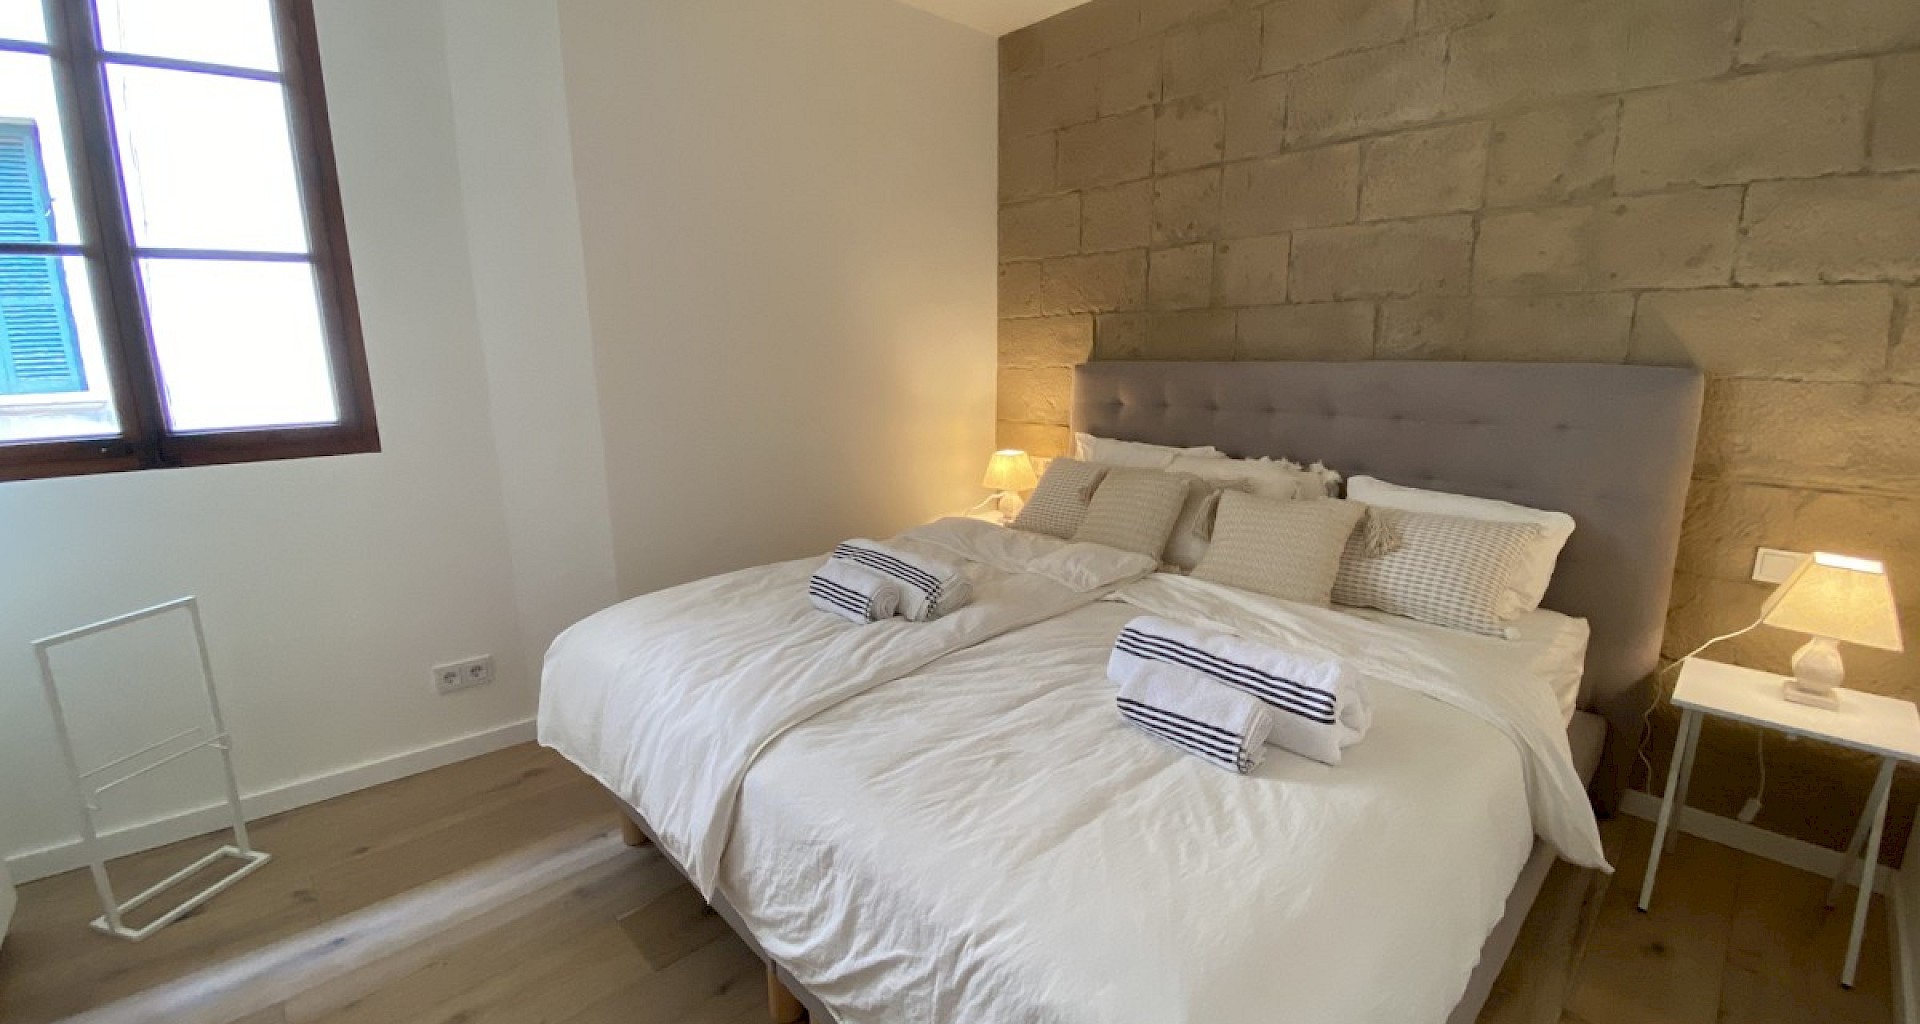 KROHN & LUEDEMANN Modern renovated apartment in Palma old town for sale Wohnung in Palma Altstadt 09